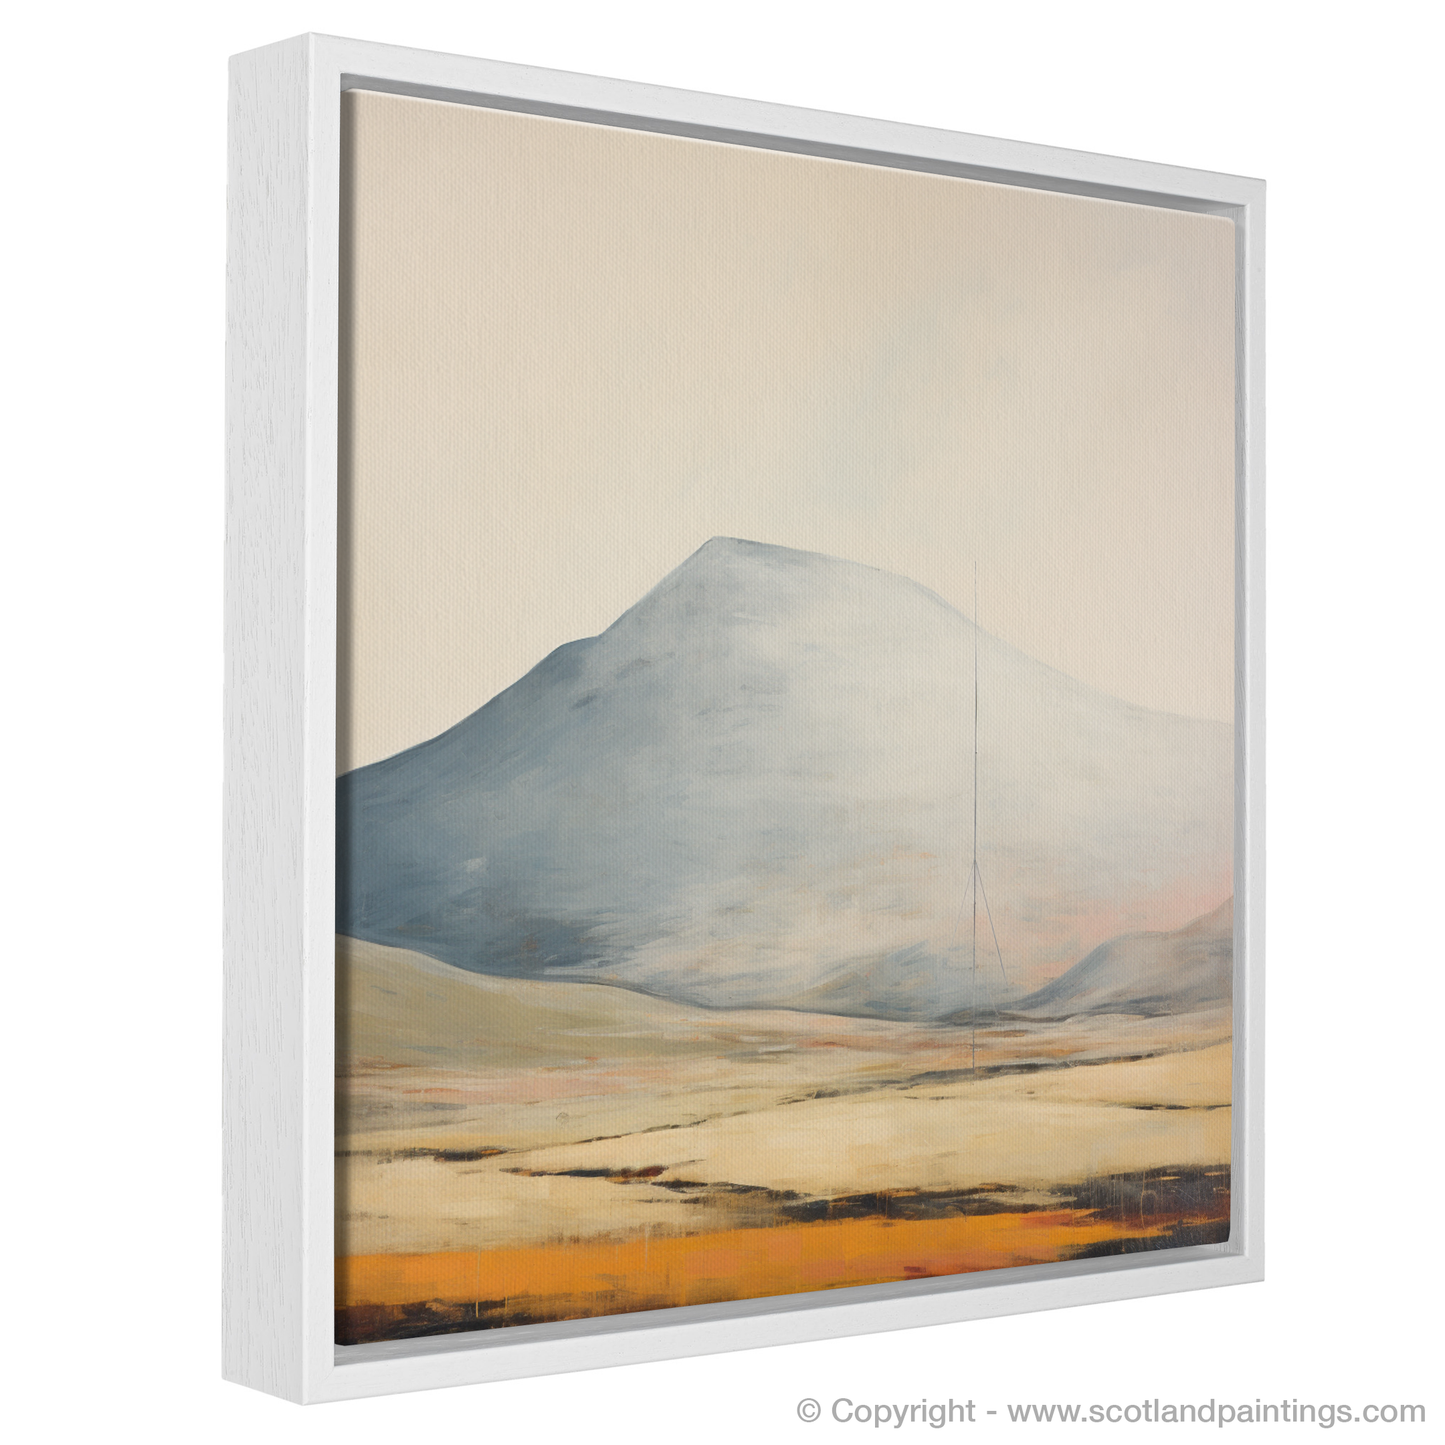 Painting and Art Print of The Cairnwell entitled "The Cairnwell Unveiled: An Abstract Highland Reverie".